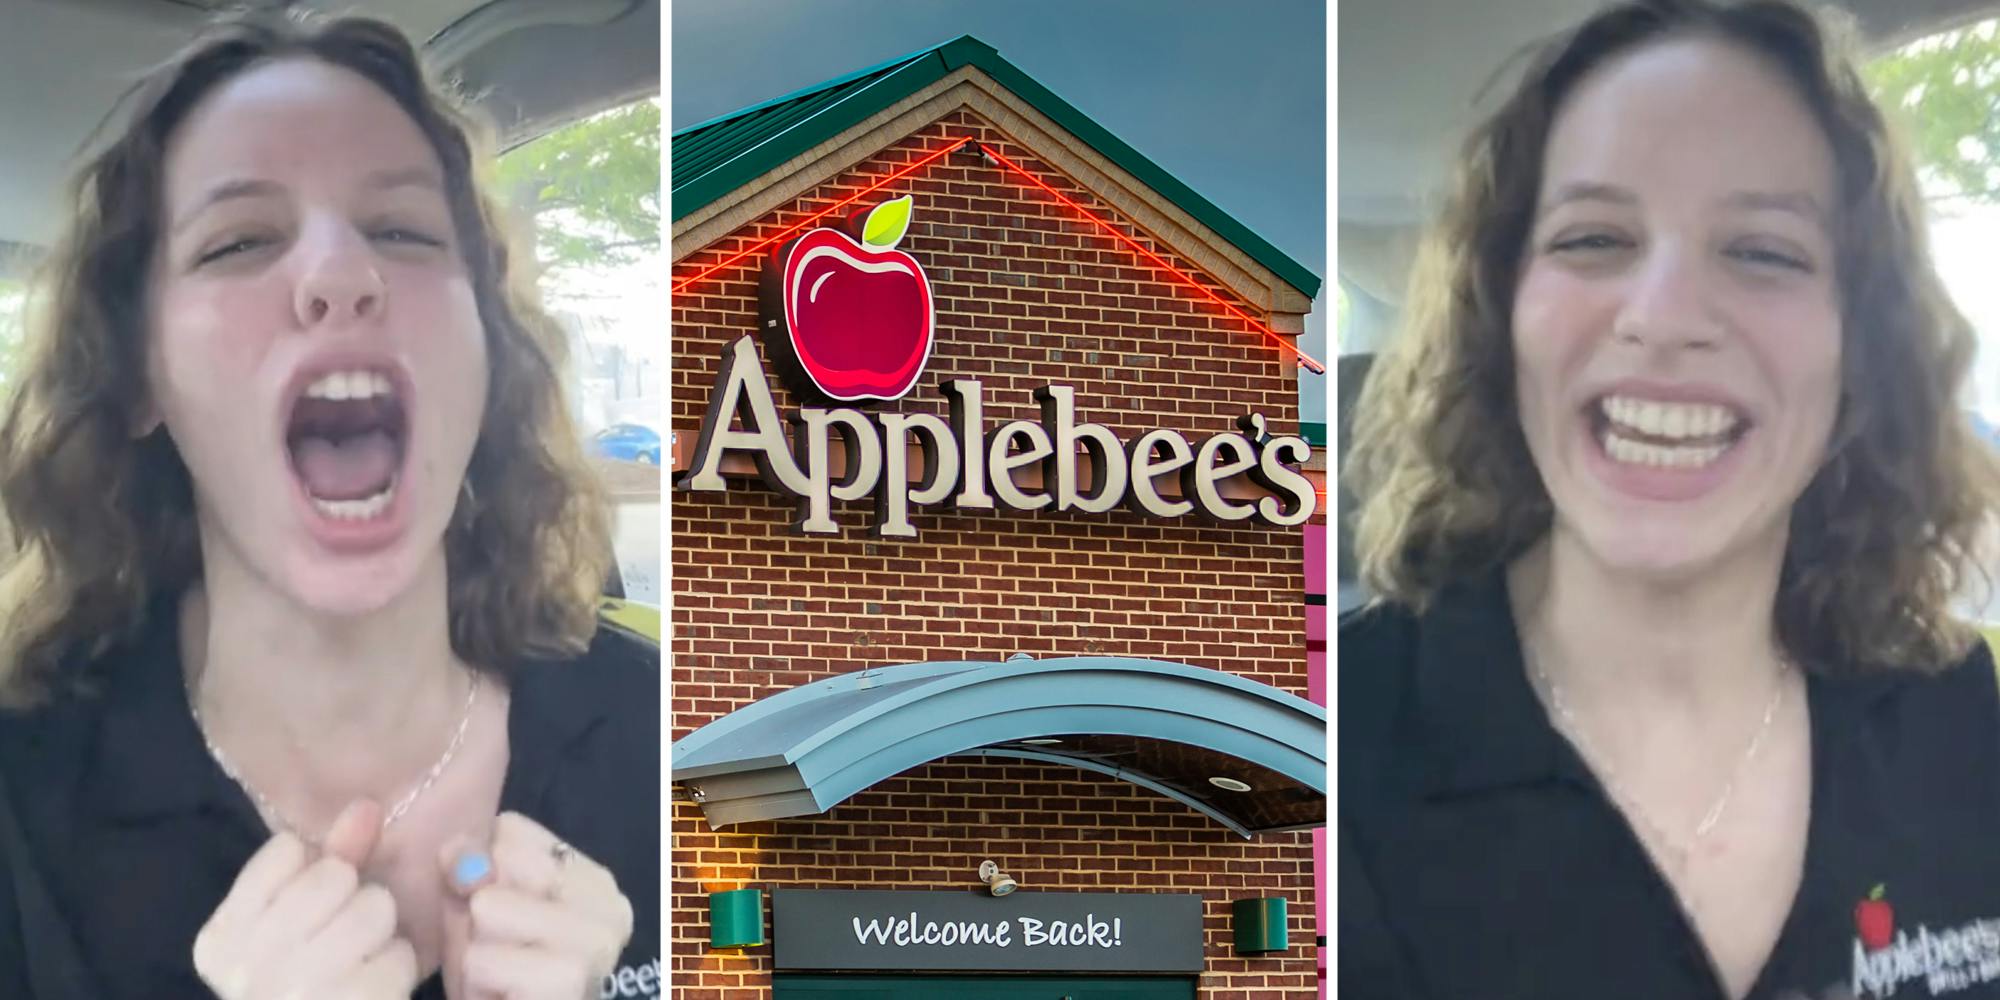 ‘Bruh no way’: Applebee’s server gets asked unexpected question about the fish and chips